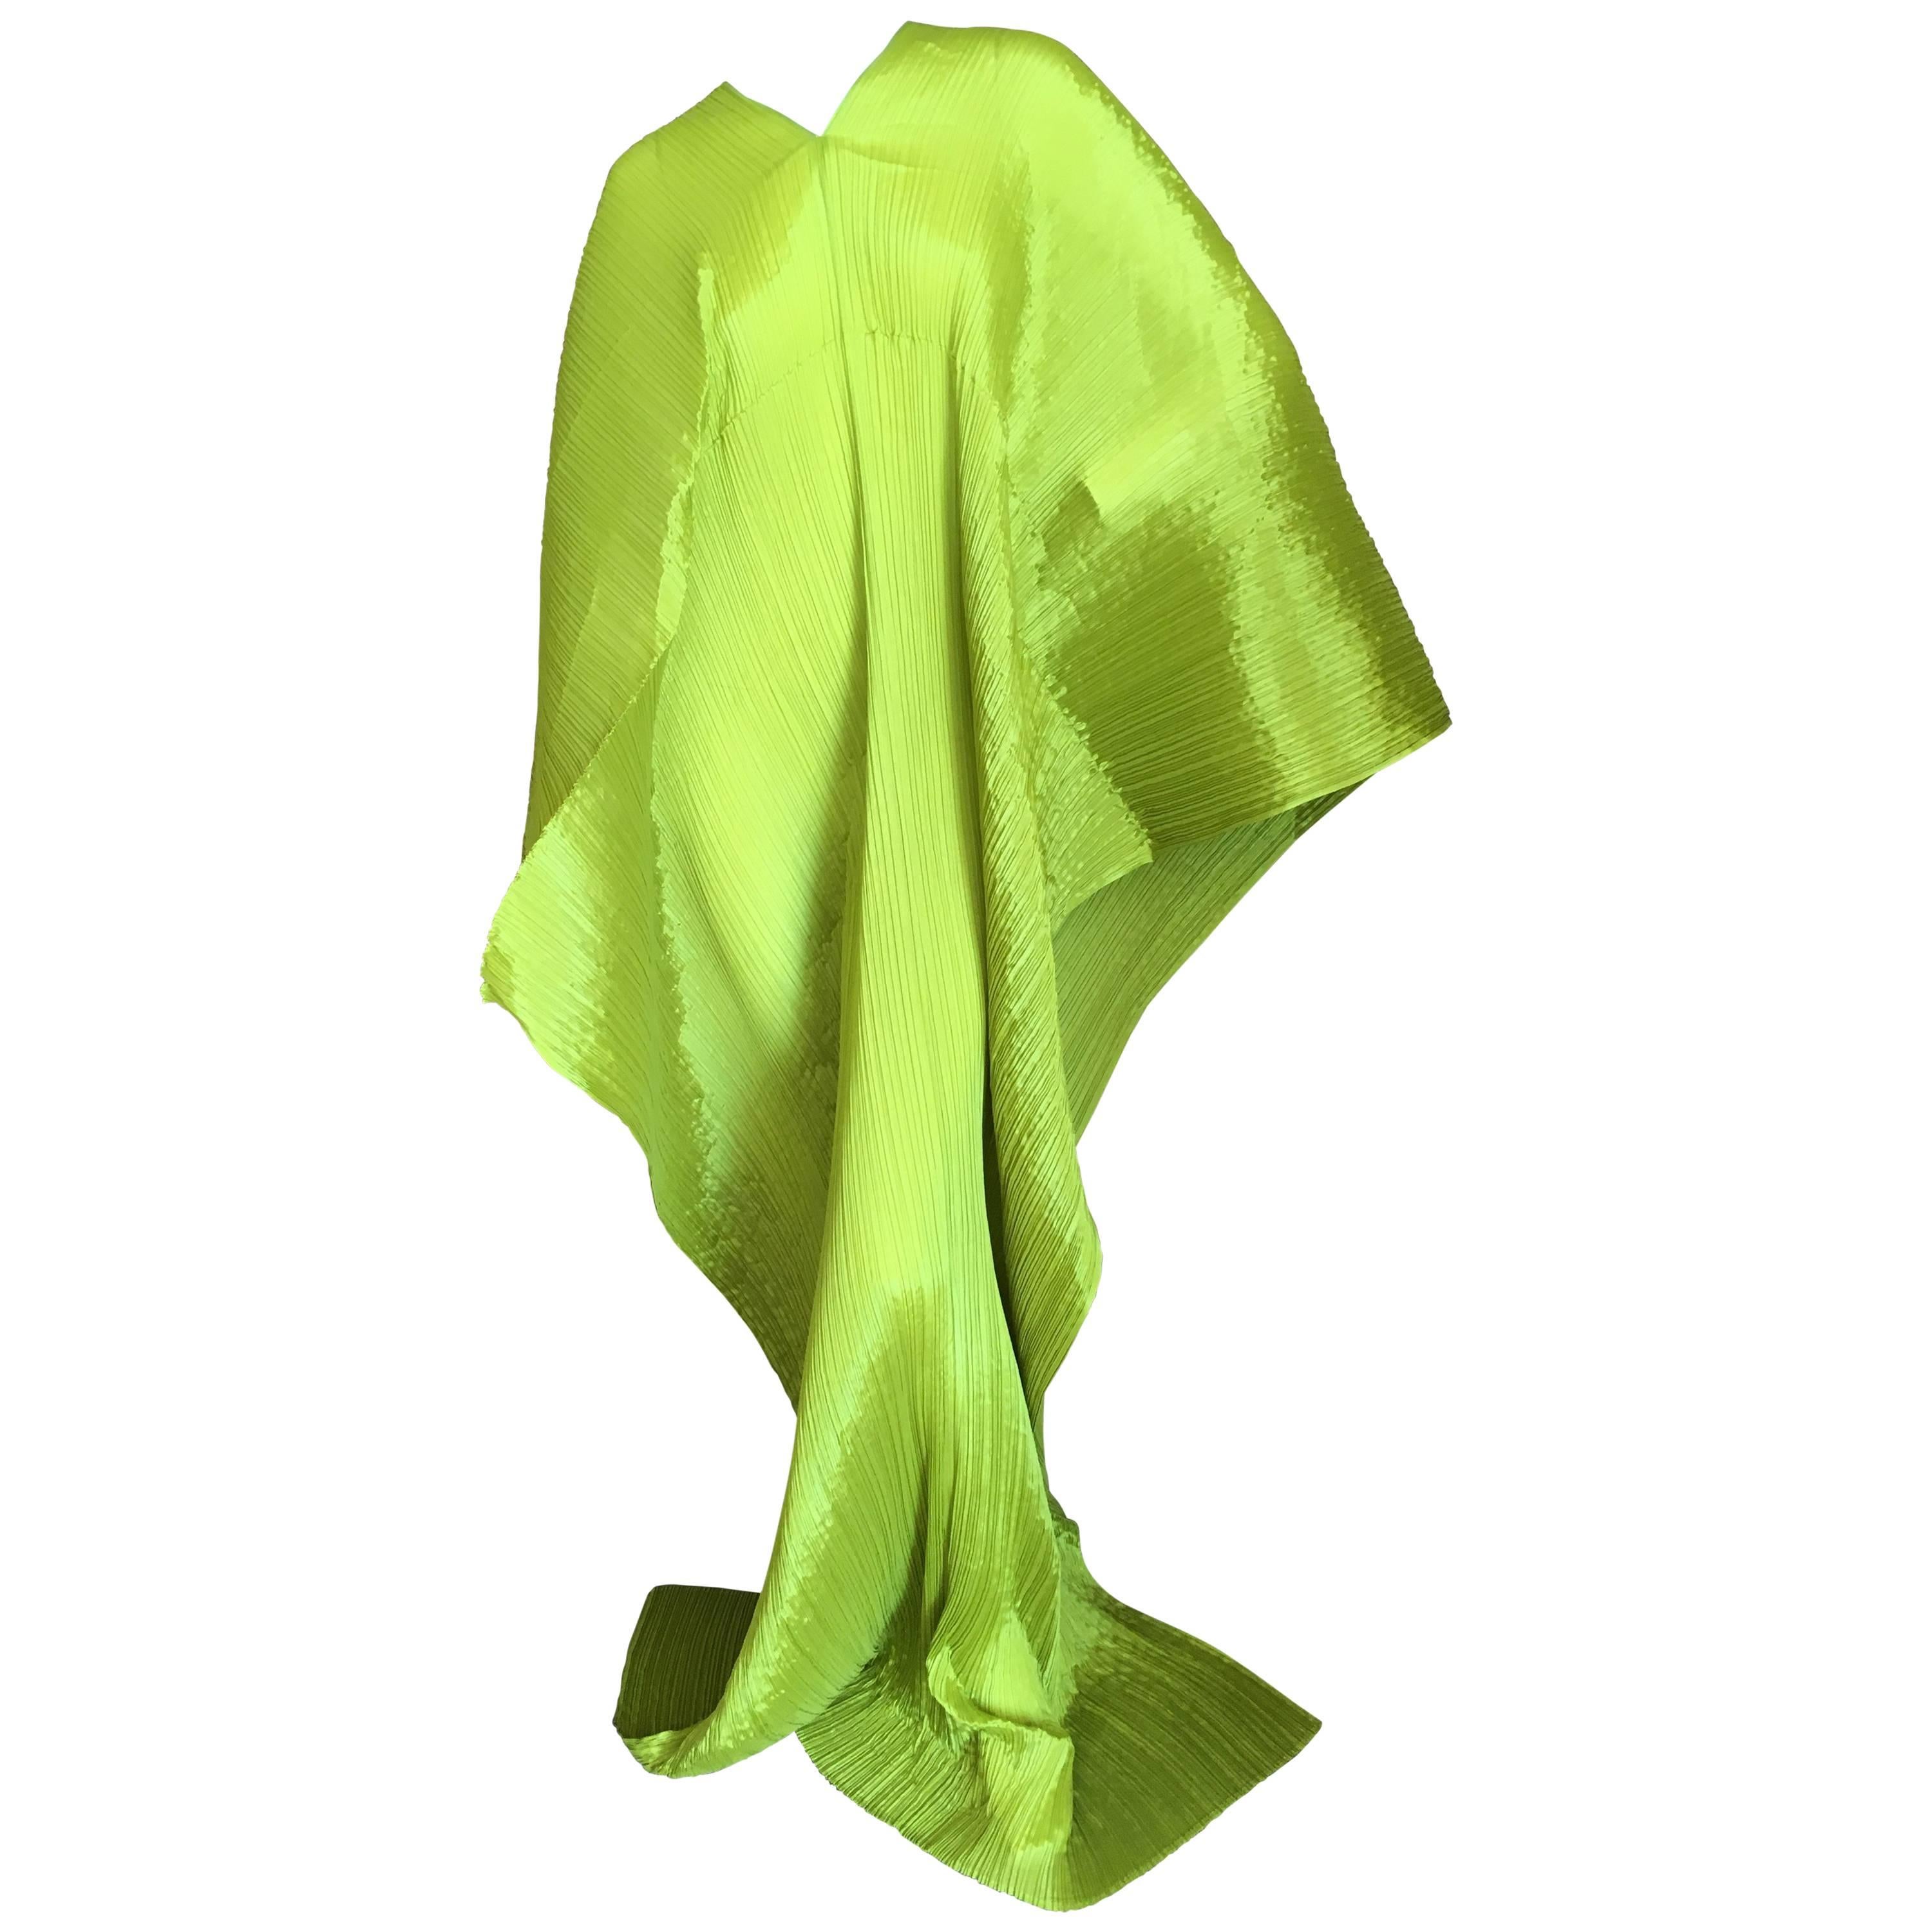 Issey Miyake Sculptural Neon Green Pleated Poncho by Issey Miyake Pleats Please For Sale